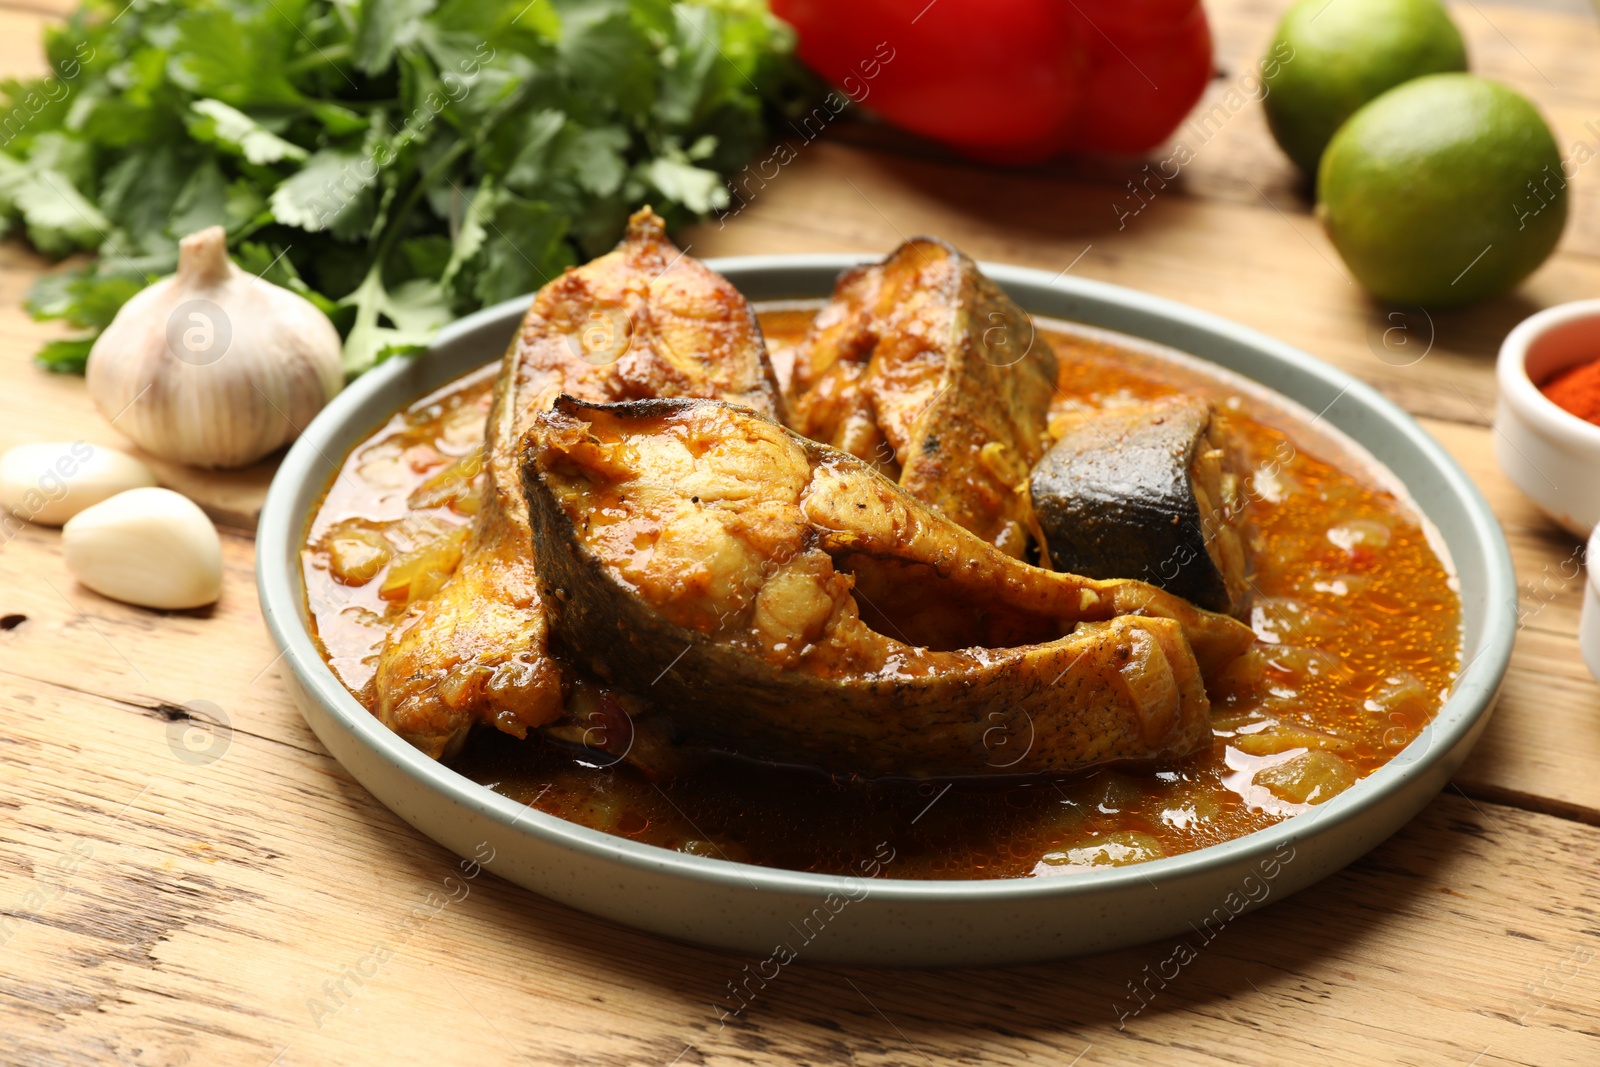 Photo of Tasty fish curry and ingredients on wooden table, closeup. Indian cuisine